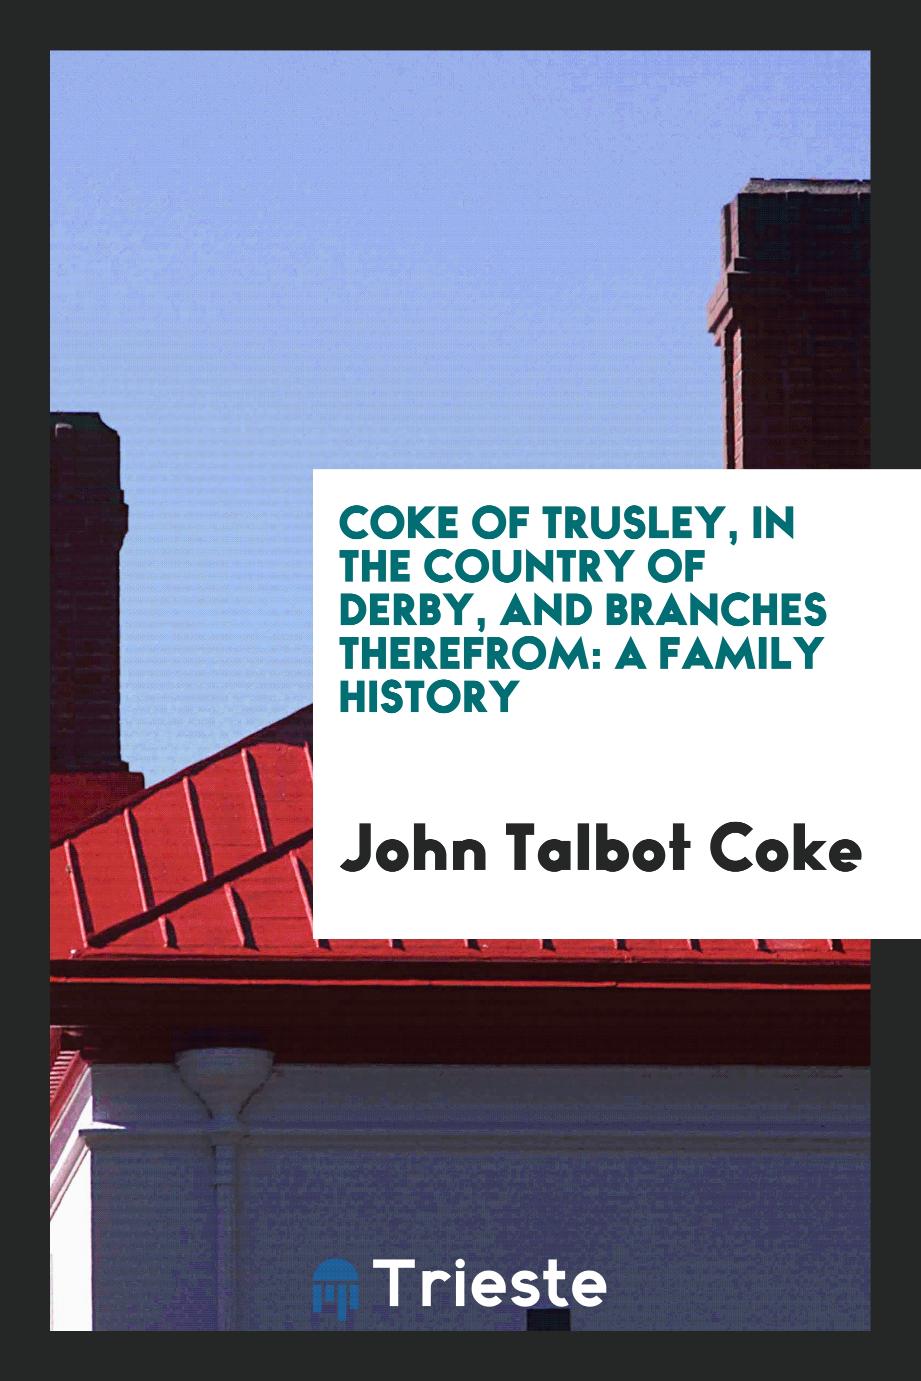 Coke of Trusley, in the Country of Derby, and Branches Therefrom: A Family History